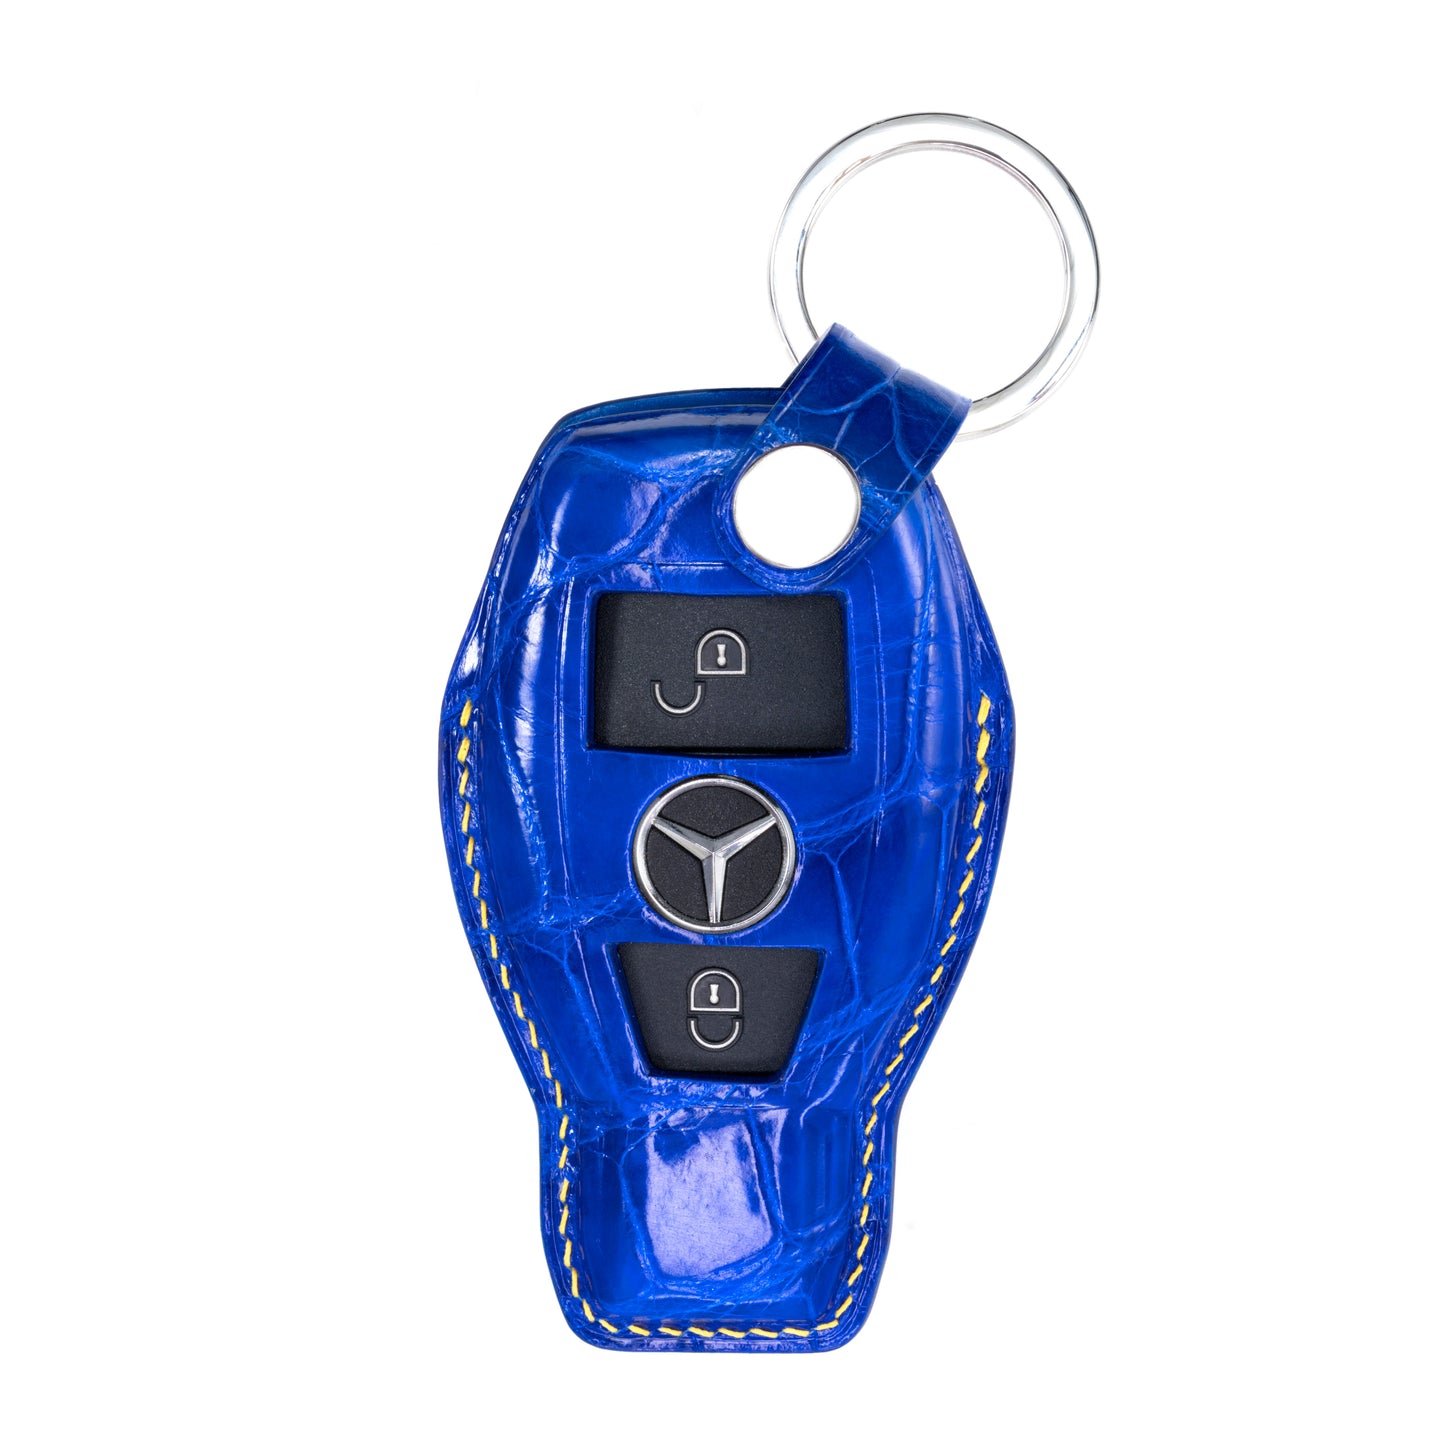 Mercedes 2 Buttons Key Fob Cover in Blue Crocodile